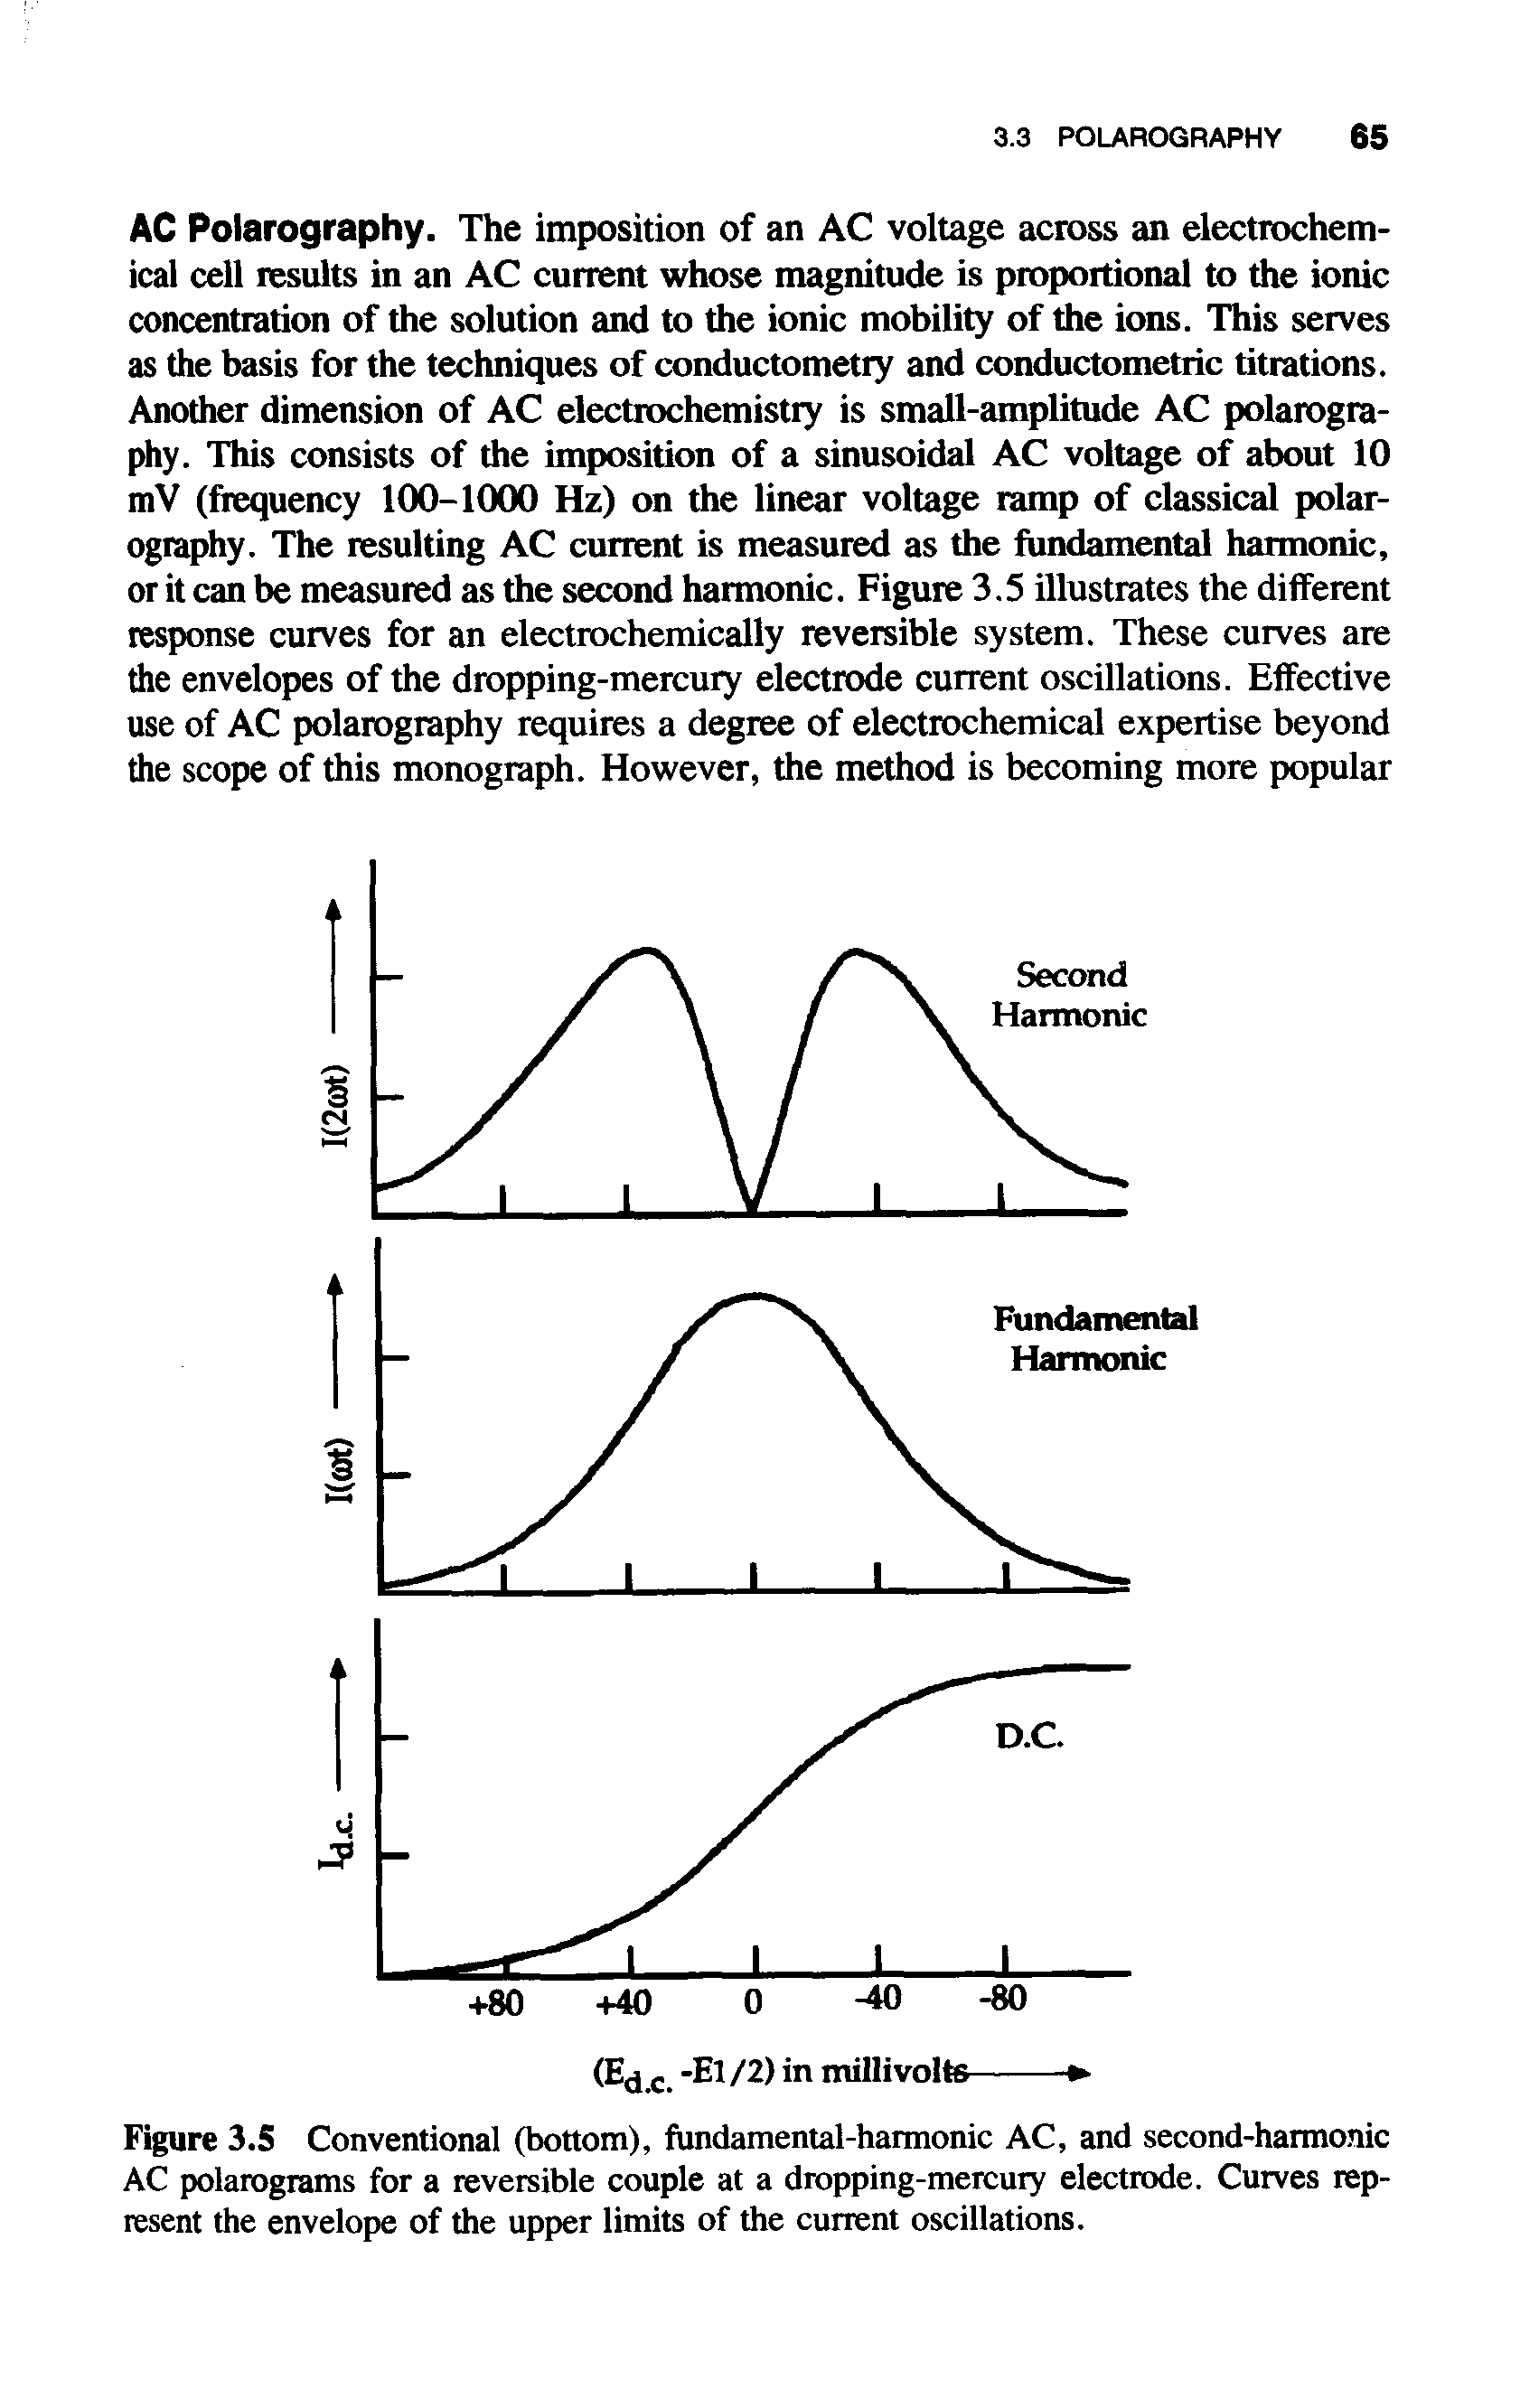 Figure 3.5 Conventional (bottom), fundamental-harmonic AC, and second-harmonic AC polarograms for a reversible couple at a dropping-mercury electrode. Curves represent the envelope of the upper limits of the current oscillations.